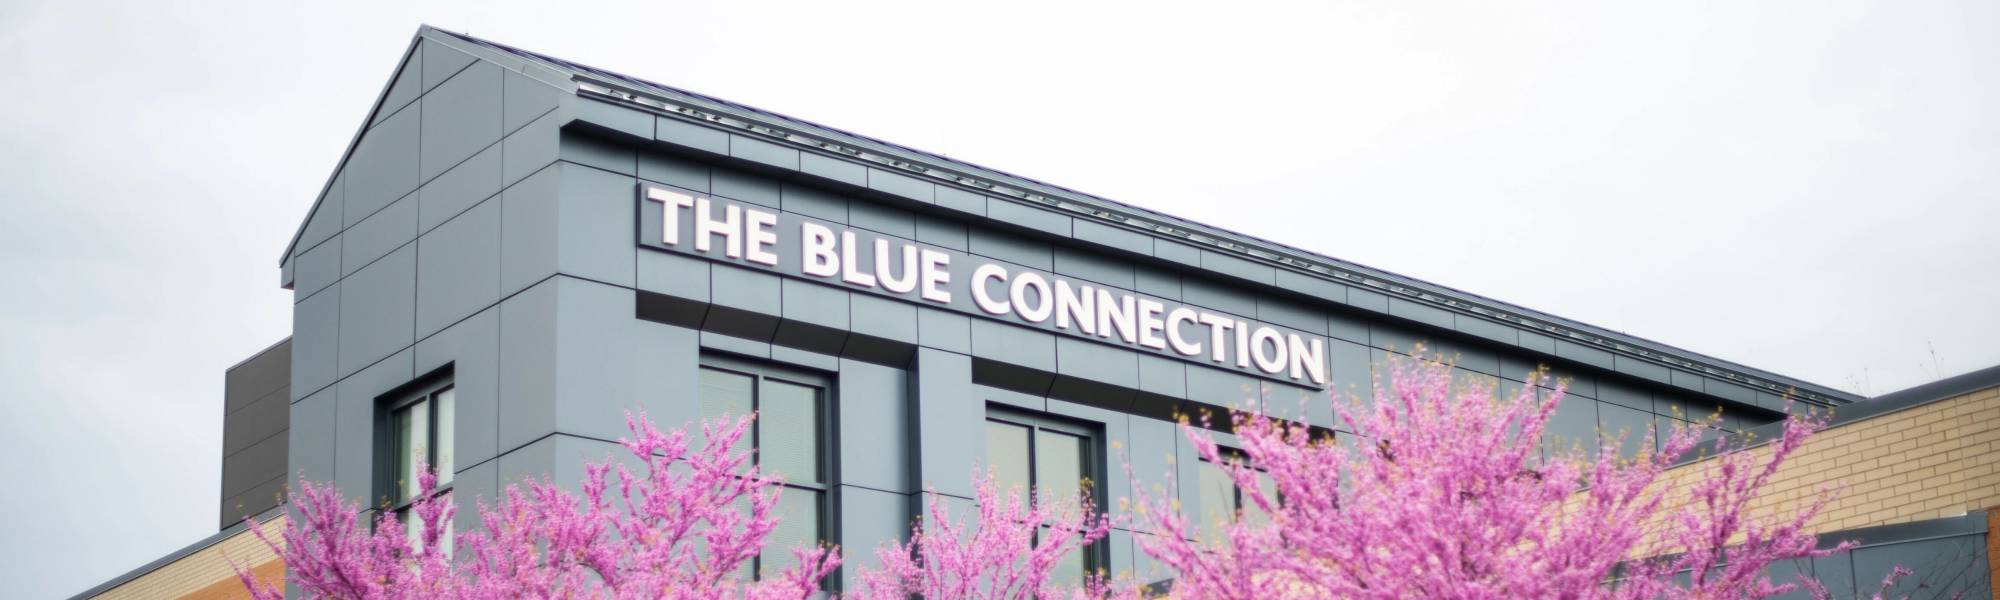 The Blue Connection Building at Grand Valley State University